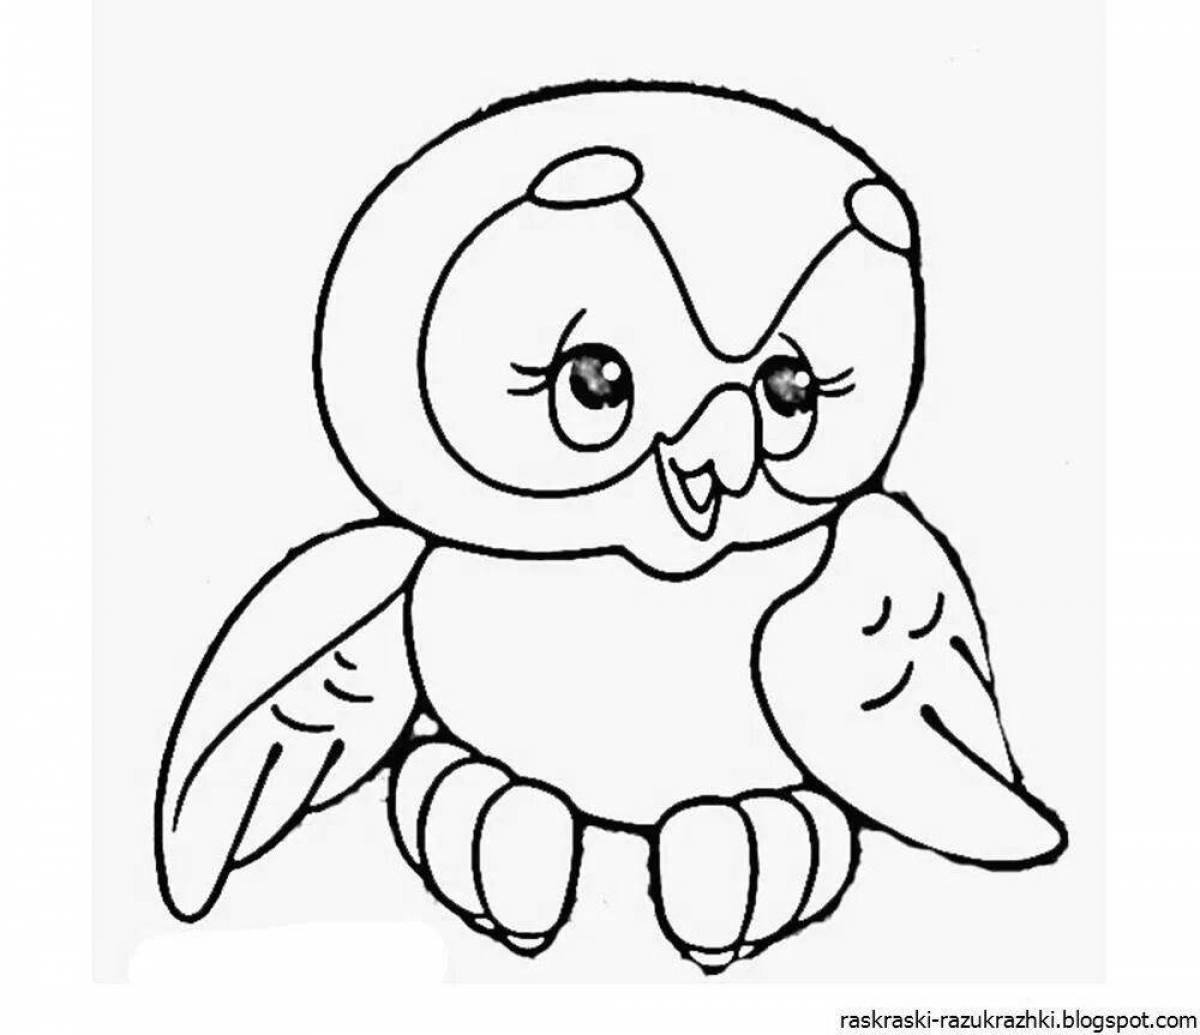 Coloring page mysterious owlet